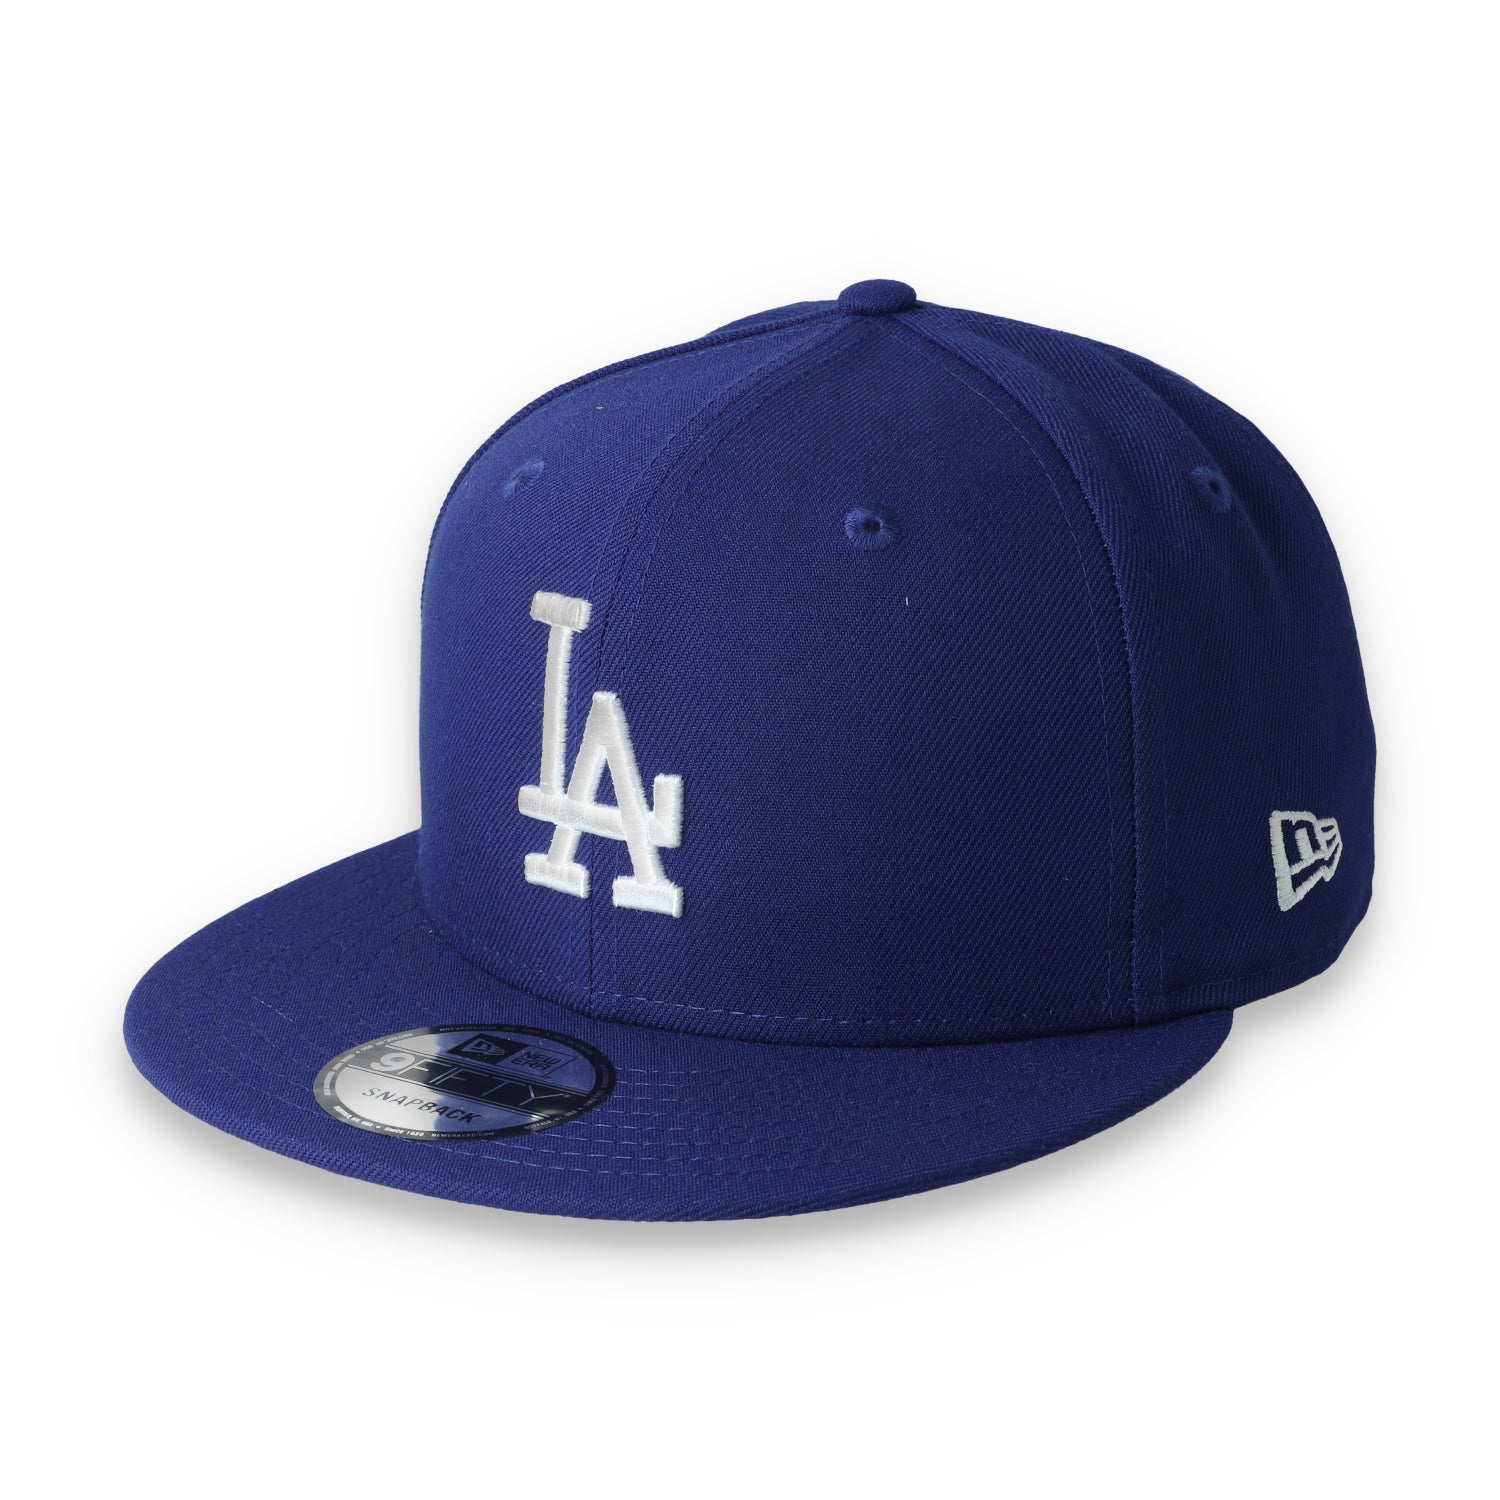 New Era Los Angeles Dodgers Patch E3 9FIFTY Snapback Hat